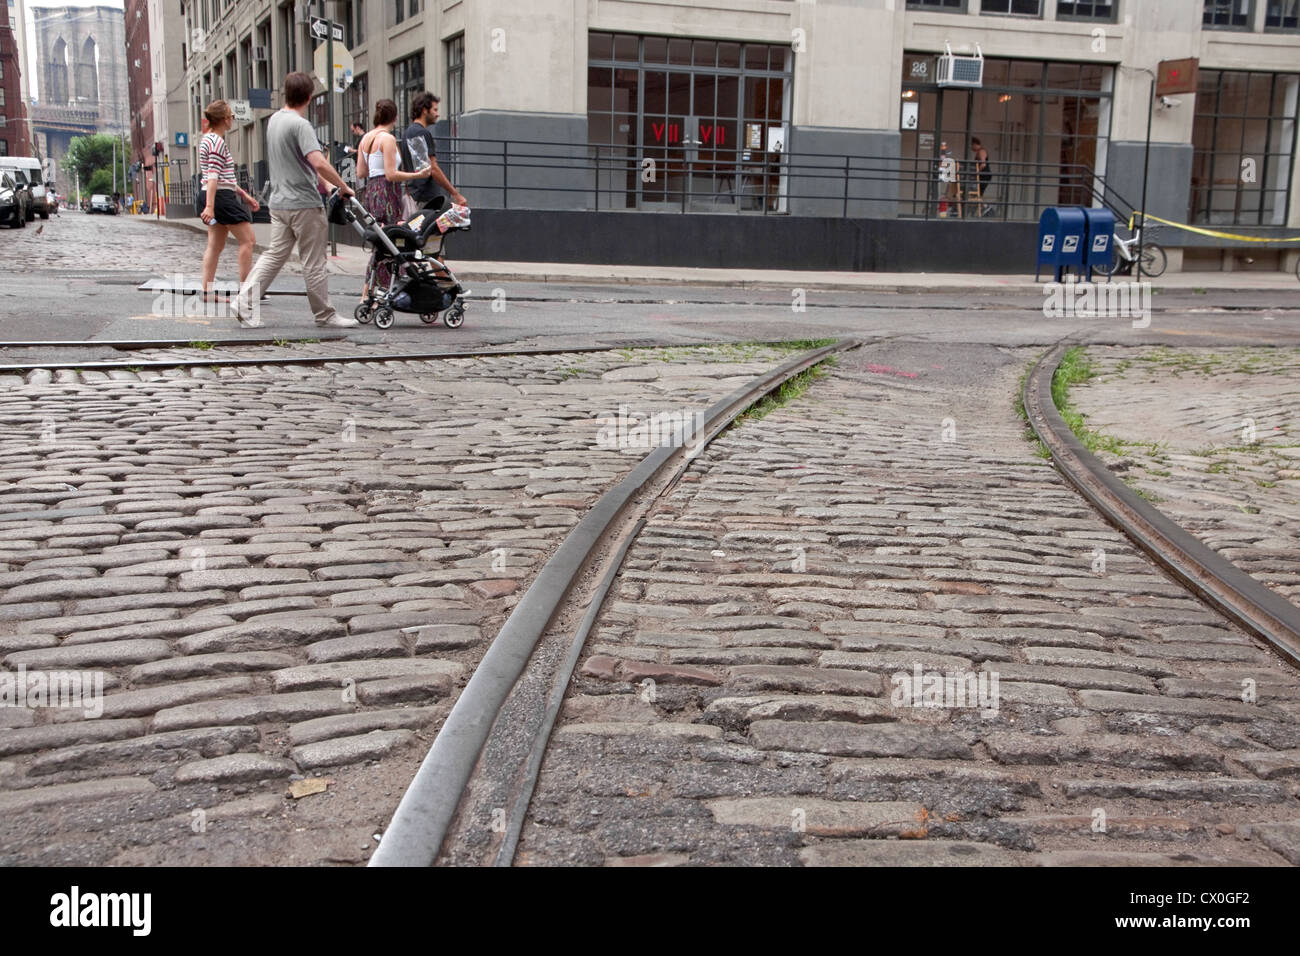 Tourists stroll along old cobblestone streets & trolley tracks in the DUMBO section of Brooklyn, New York past VII Photo Agency. Stock Photo